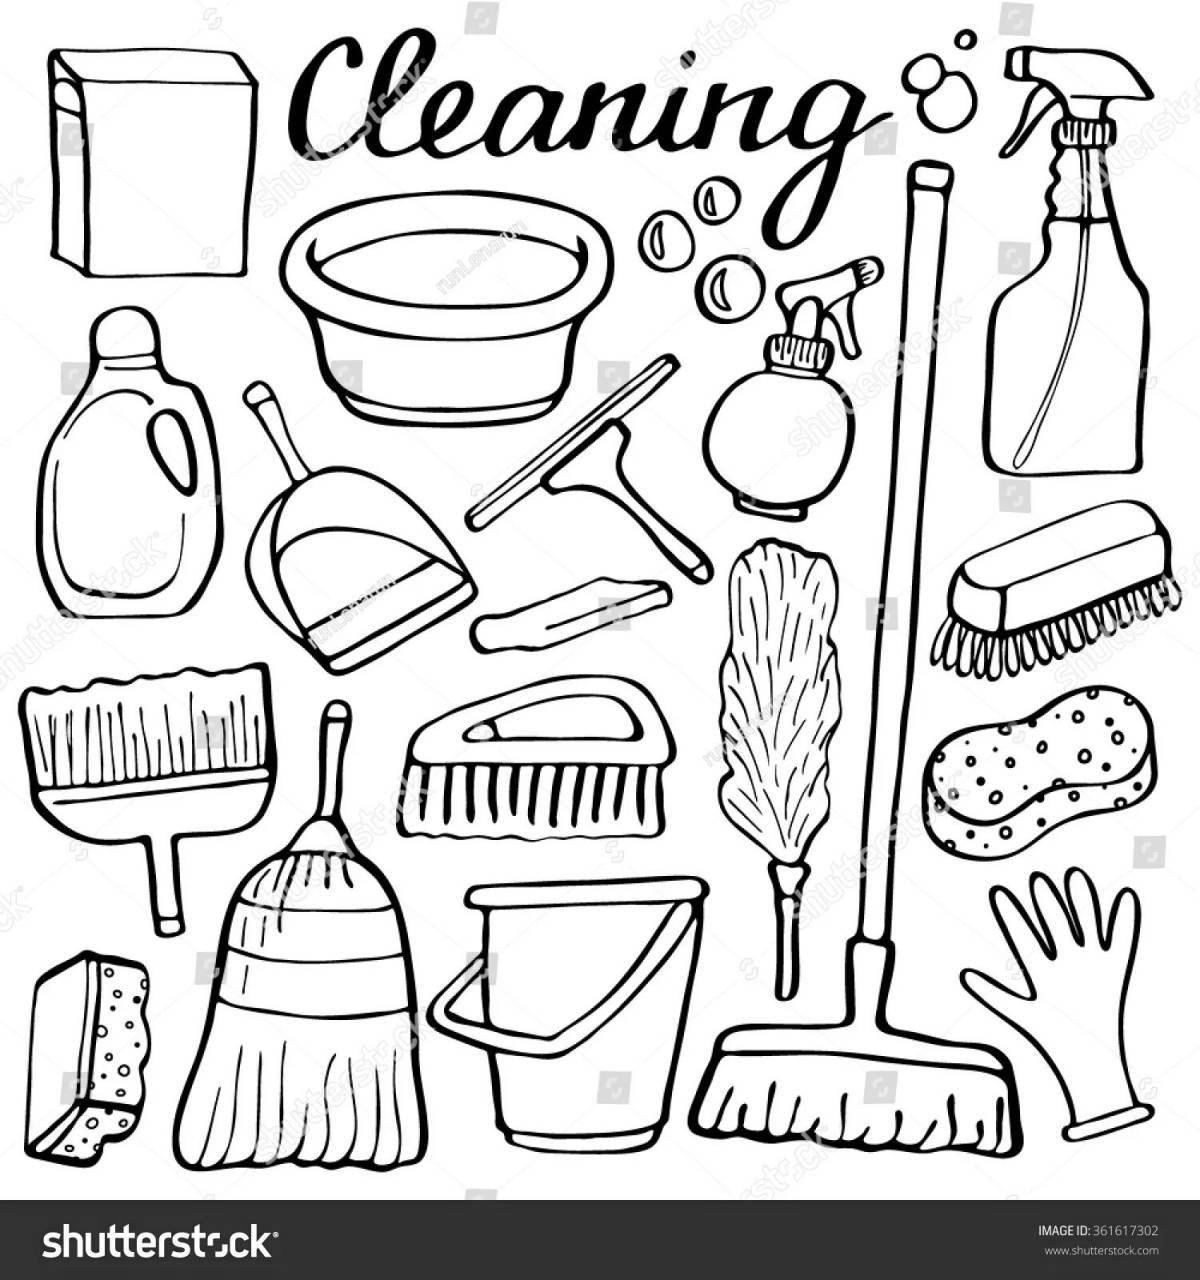 Humorous cleaning coloring book